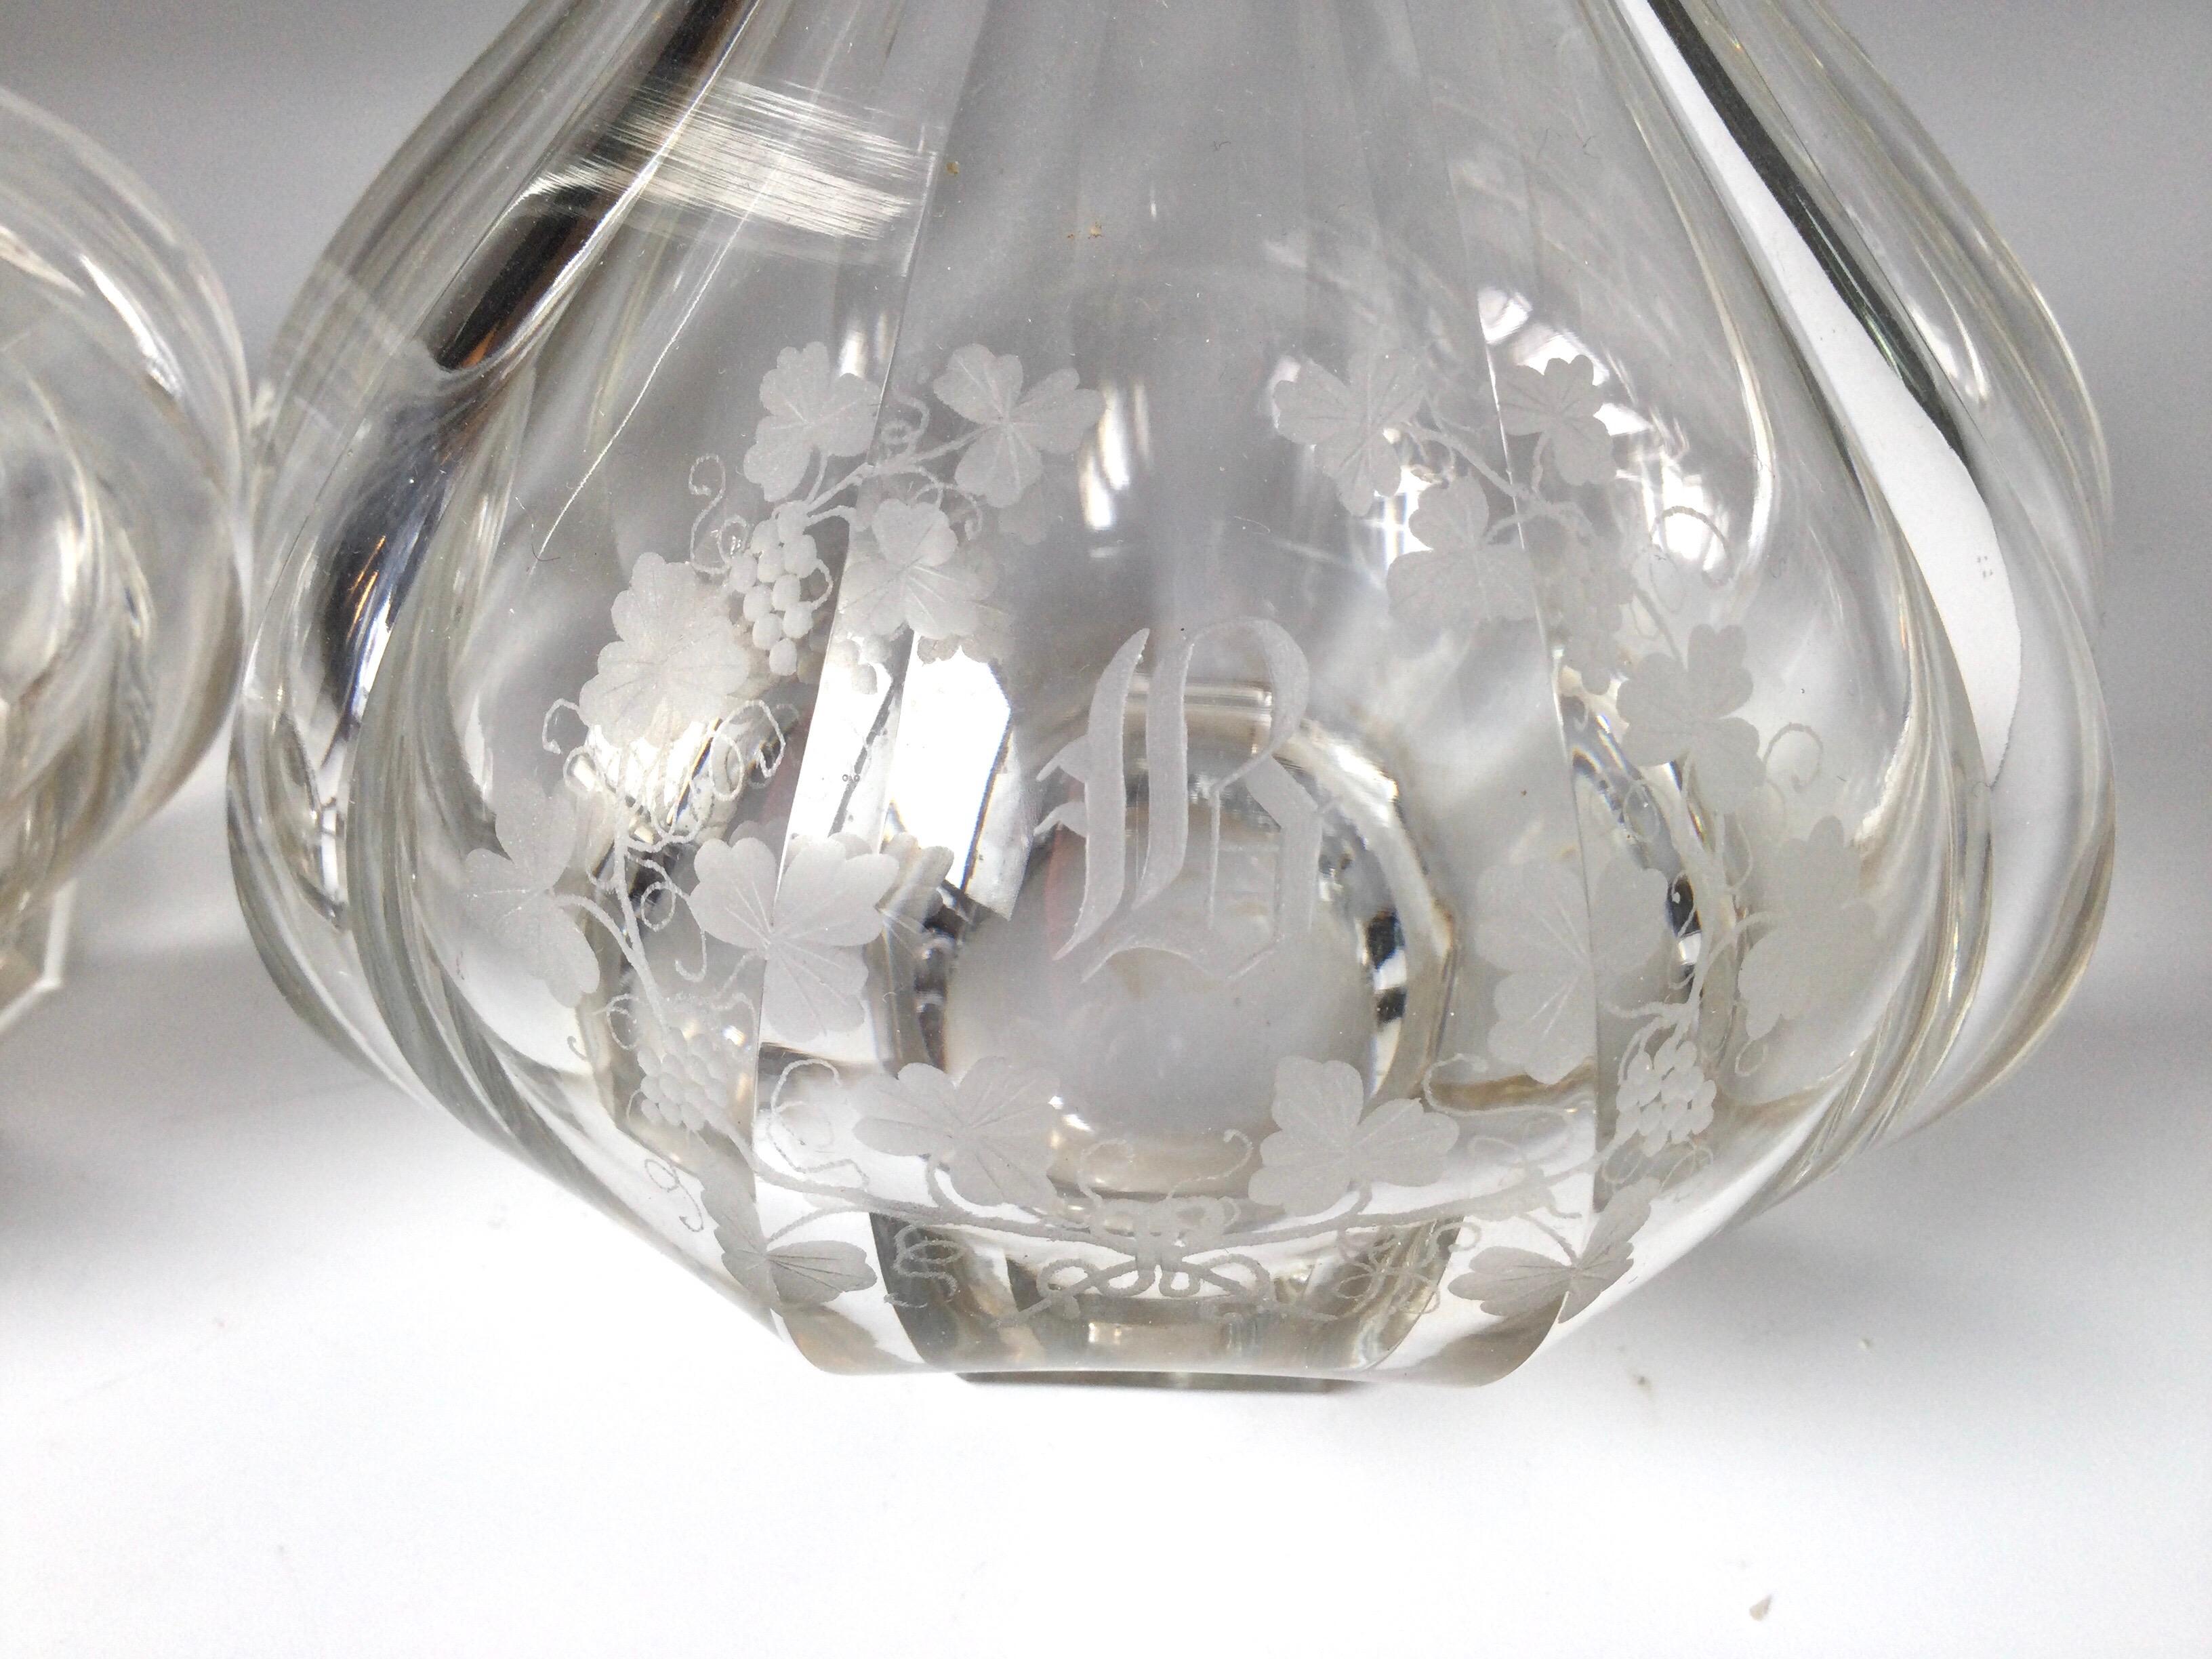 American H.P. Sinclaire & Co. pair of crystal decanter and stopper - circa 1900-1910. Elegant form with delicate engraved detail with the initial B on the fronts... Look at the close ups for detail.

    